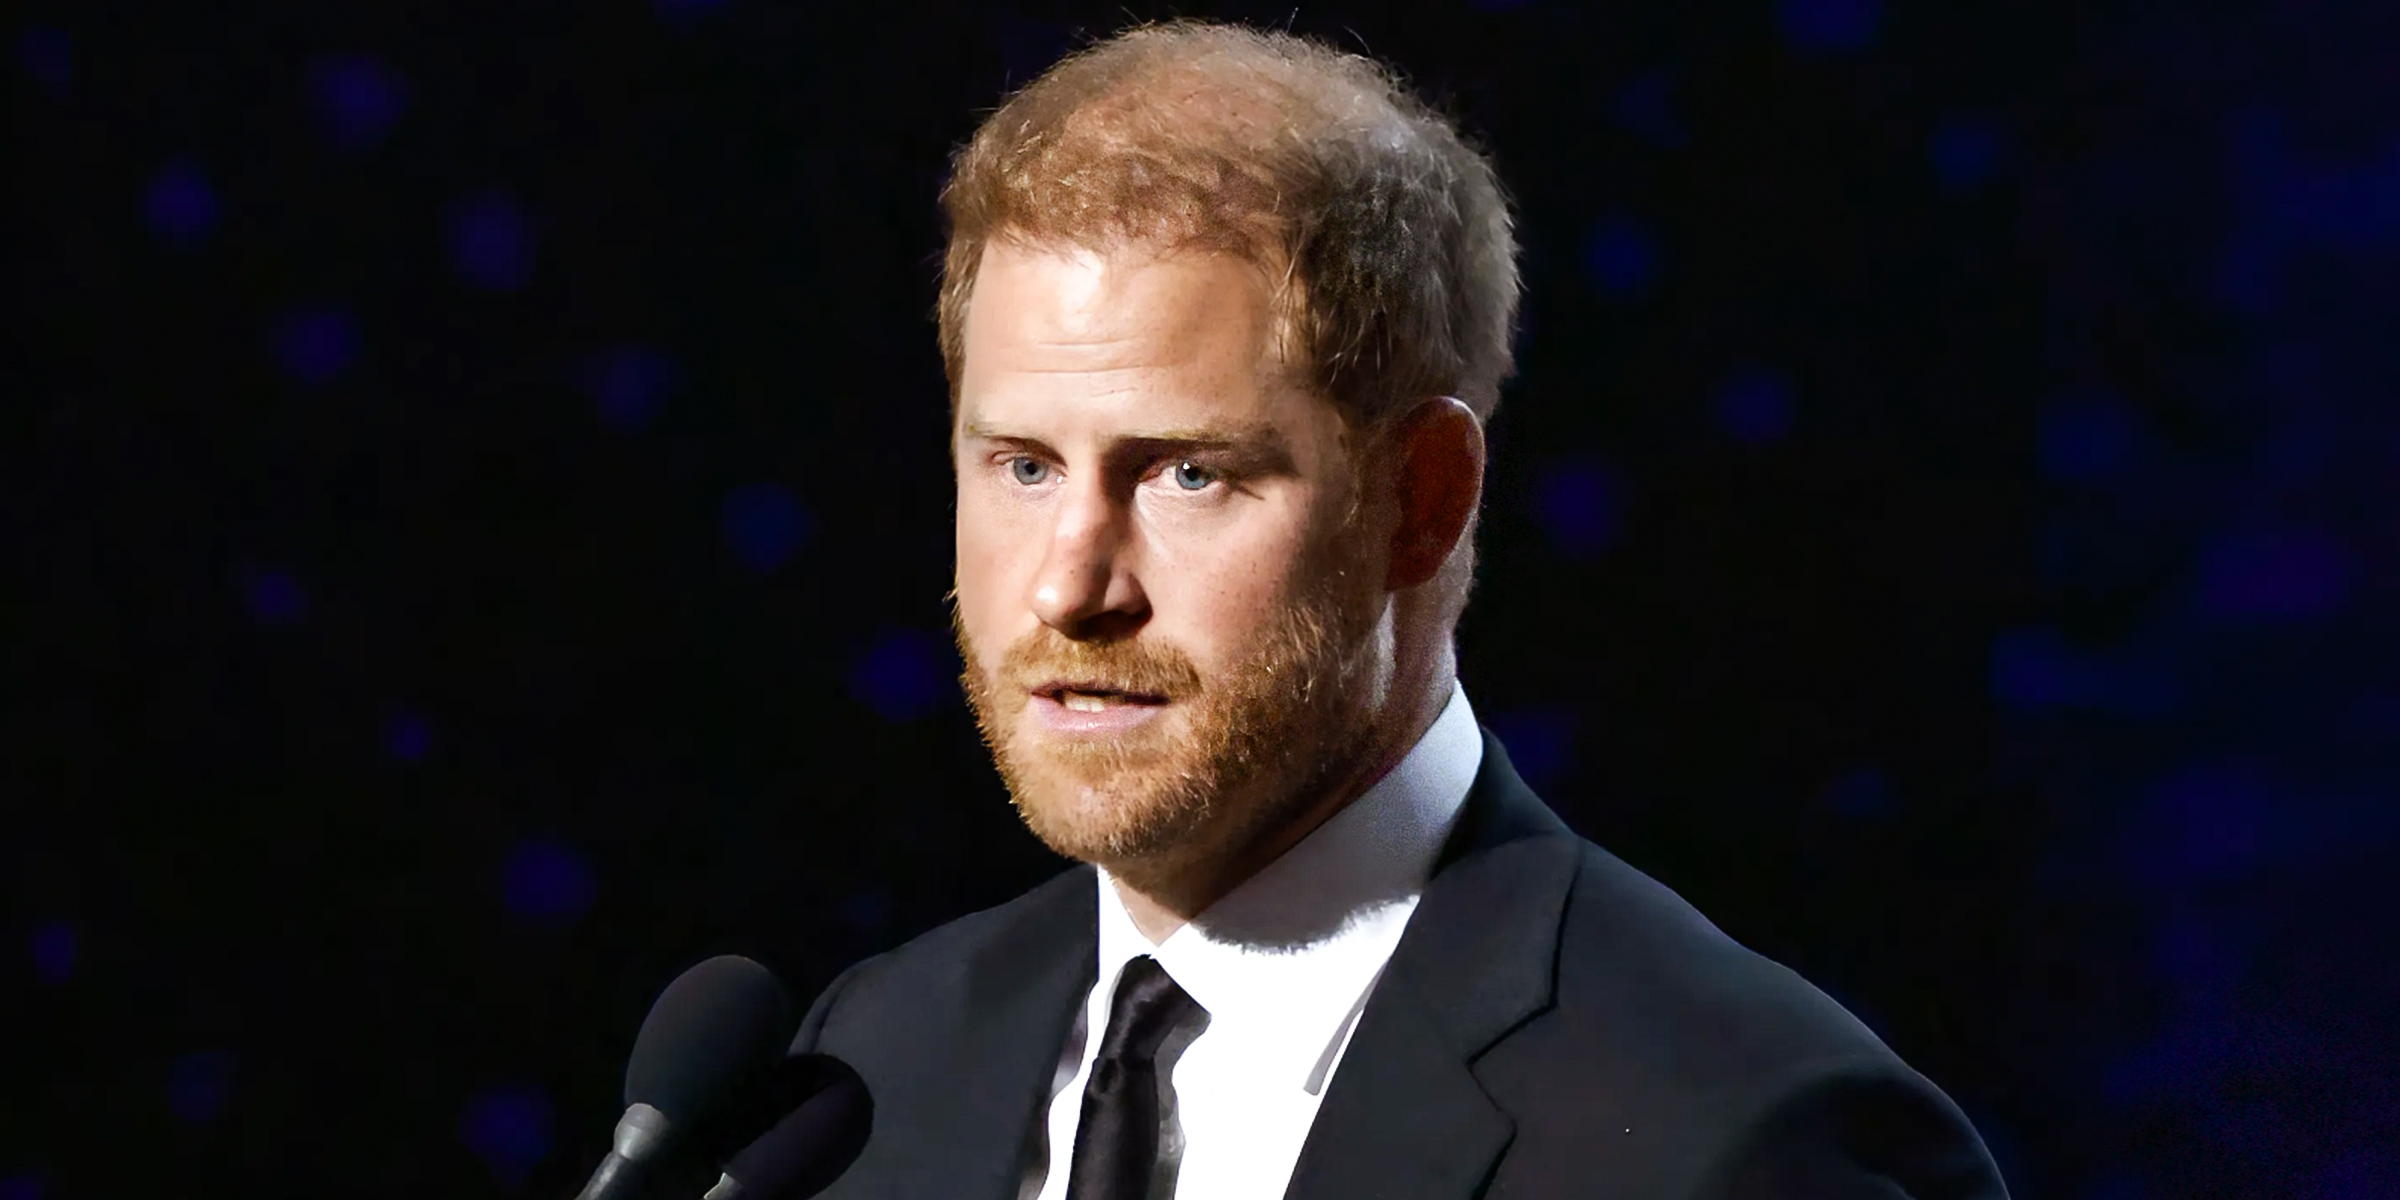 Prince Harry | Source: Getty Images